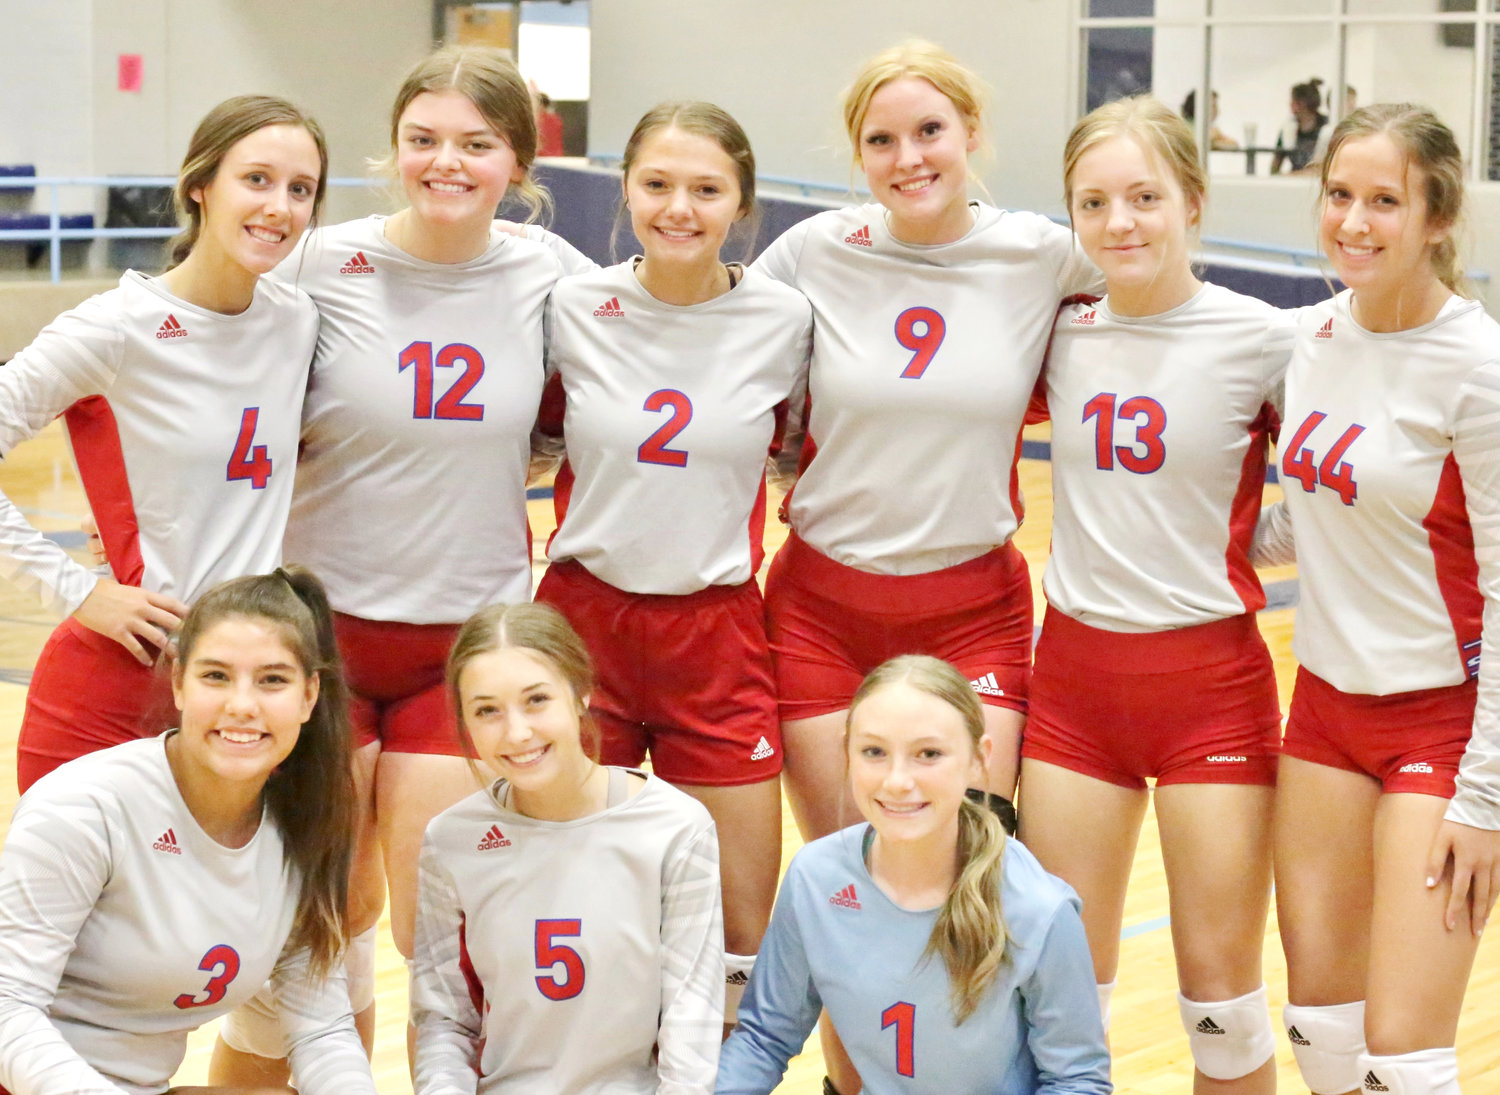 The Alba-Golden Lady Panthers varsity volleyball team. Standing from the left are Sara Hodges, Alexis Wilmut, Kalli Trimble, Kaylee Anglin, Cacie Lennon, and Skyler West. Kneeling are Erin Langston, Kamrin Wright and Alyssa Murdock.